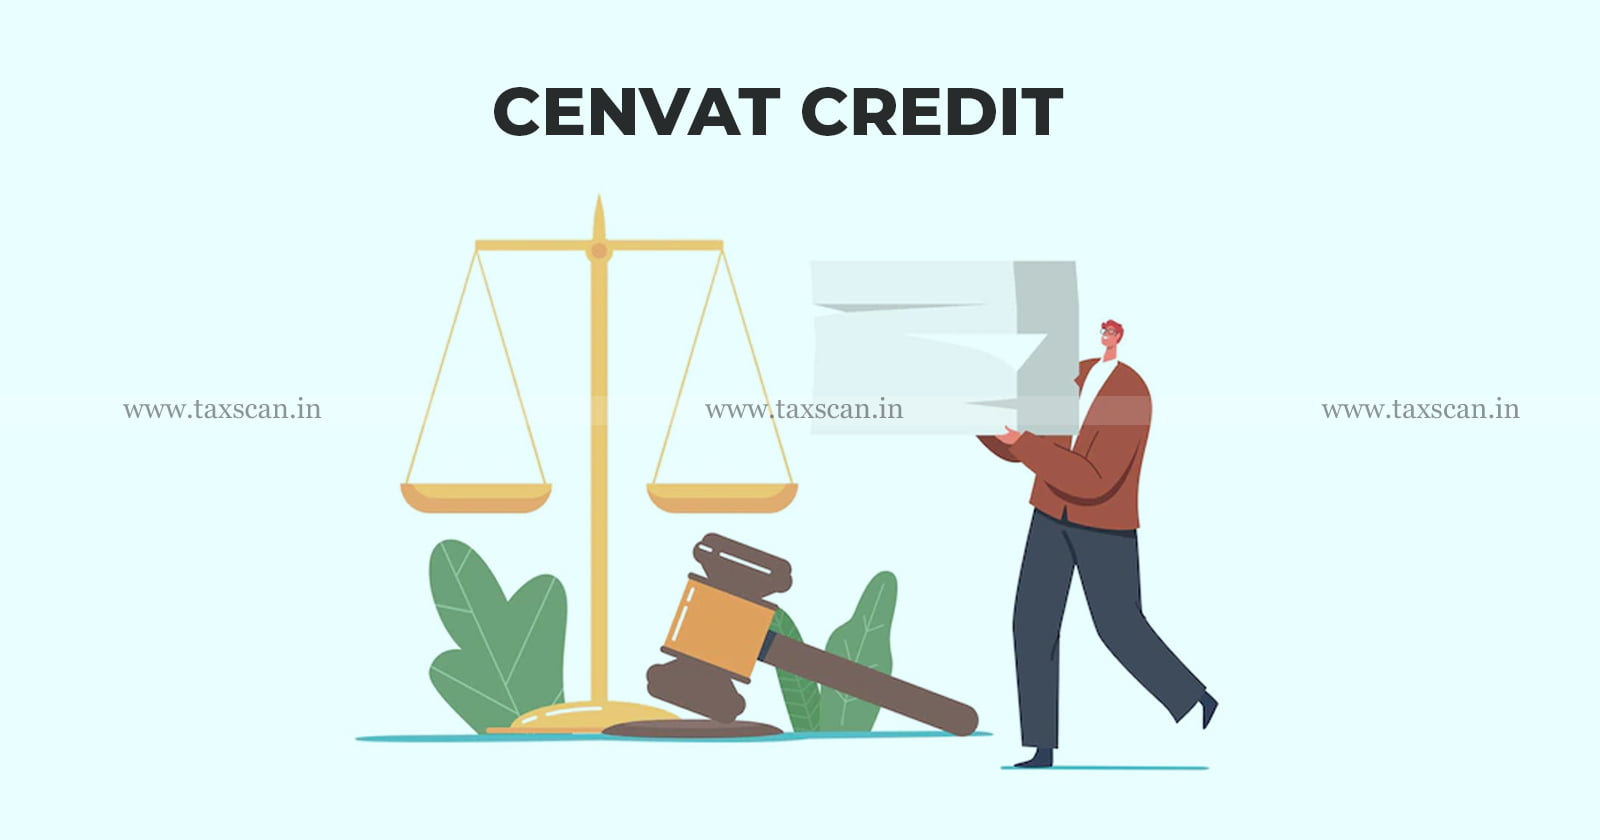 Customs - Excise - Service Tax - inventory - general provision - CESTAT - Cenvat Credit - taxscan